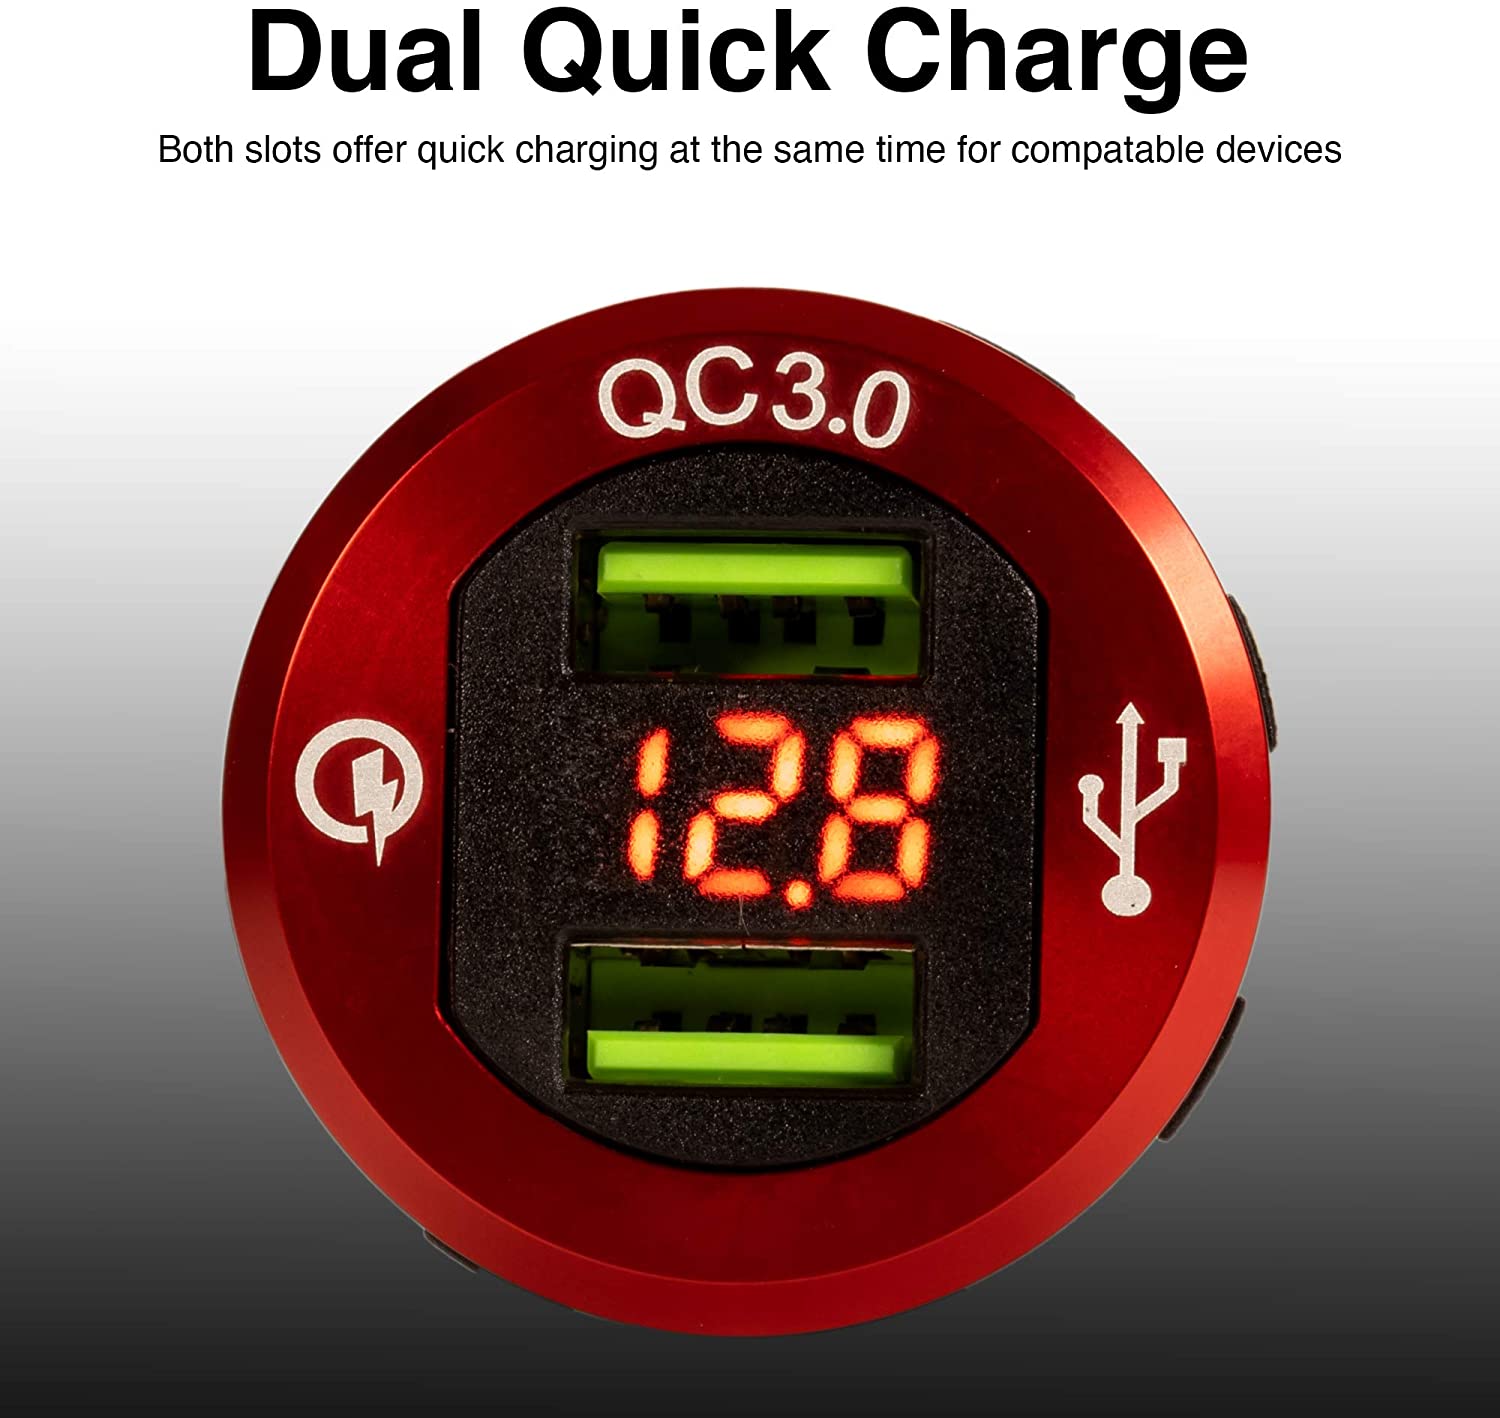 Red Quick Fast Charge USB 3.0 Car Charger, 12V/24V 36W Aluminum Waterproof Dual QC3.0 USB Fast Charger Socket Power Outlet with LED Digital Voltmeter for Marine, Boat, Motorcycle, Truck and More